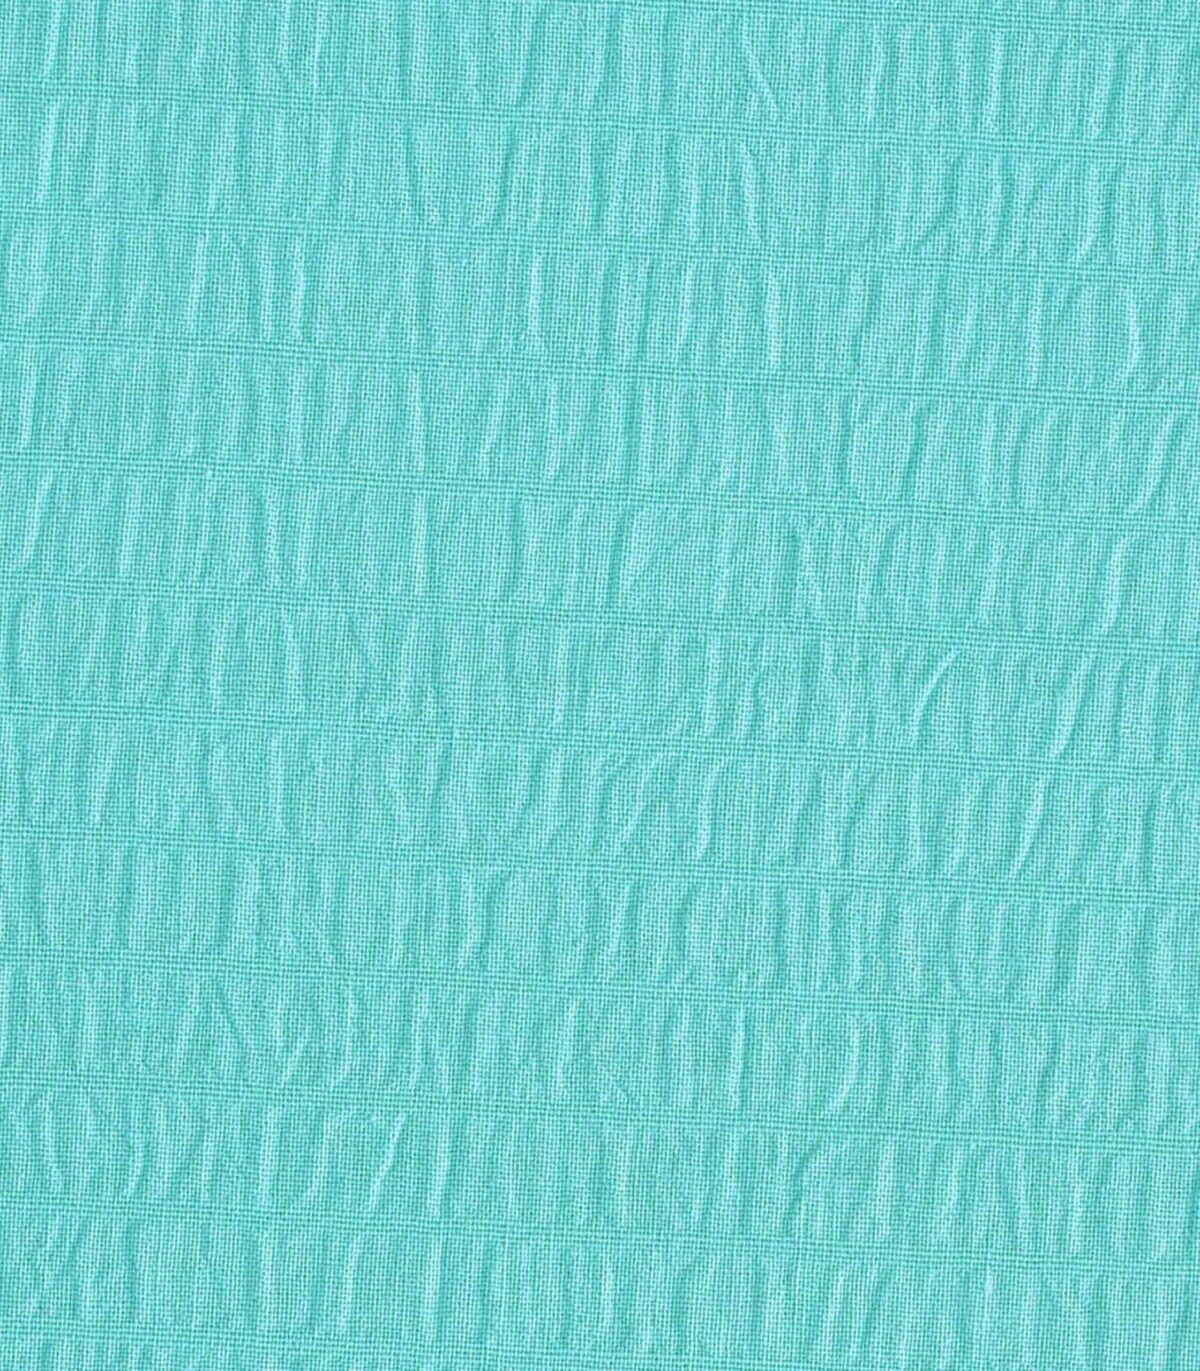 Cotton Lycra Skyblue Dyed Fabric